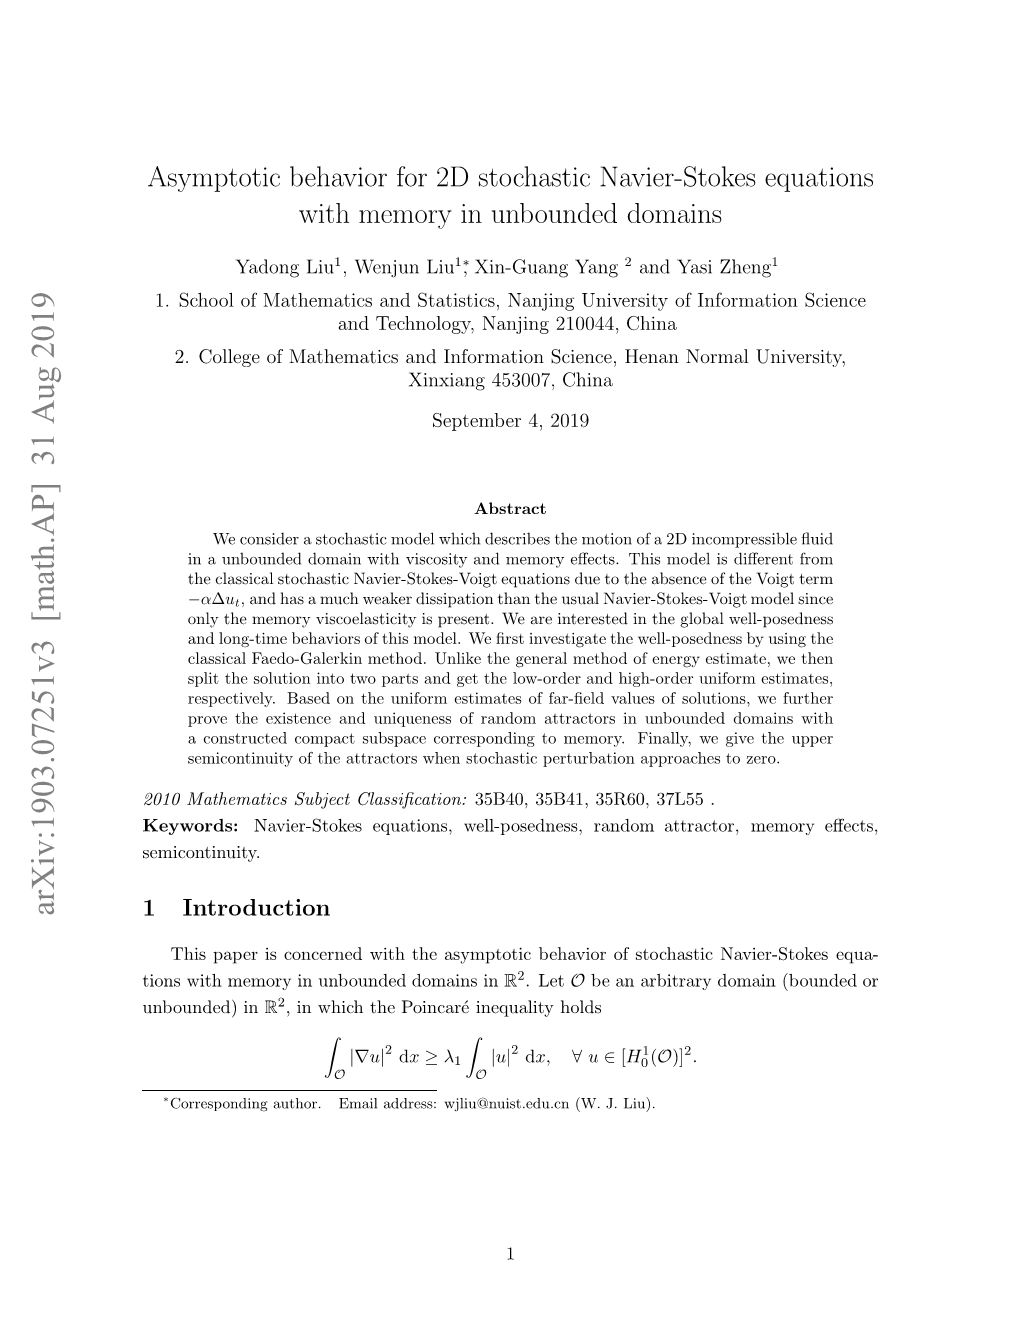 Asymptotic Behavior for 2D Stochastic Navier-Stokes Equations with Memory in Unbounded Domains